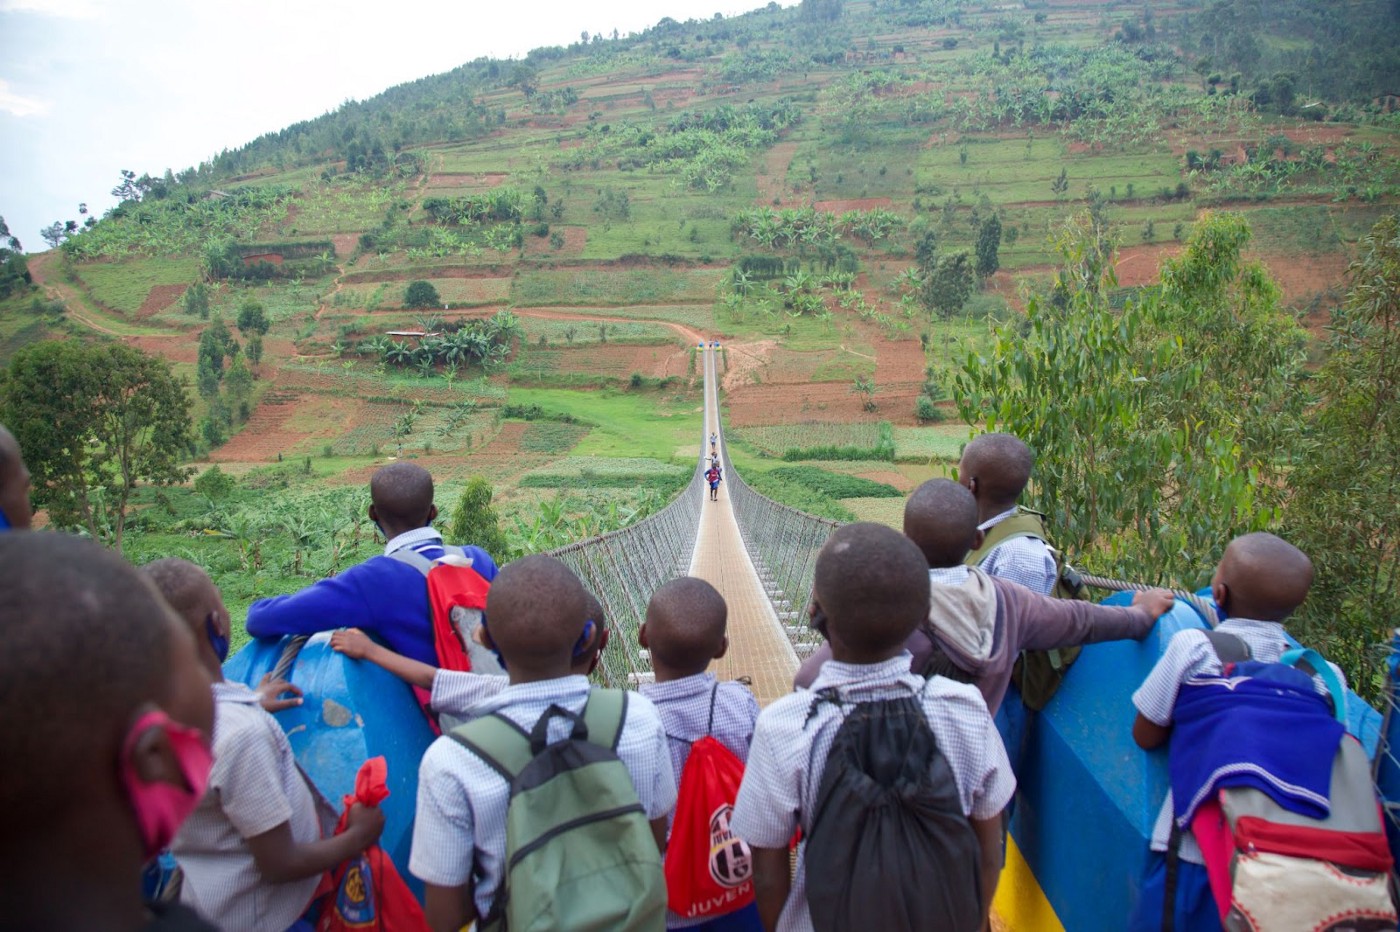 A group of young schoolchildren gather near a bridge in a rural setting. 